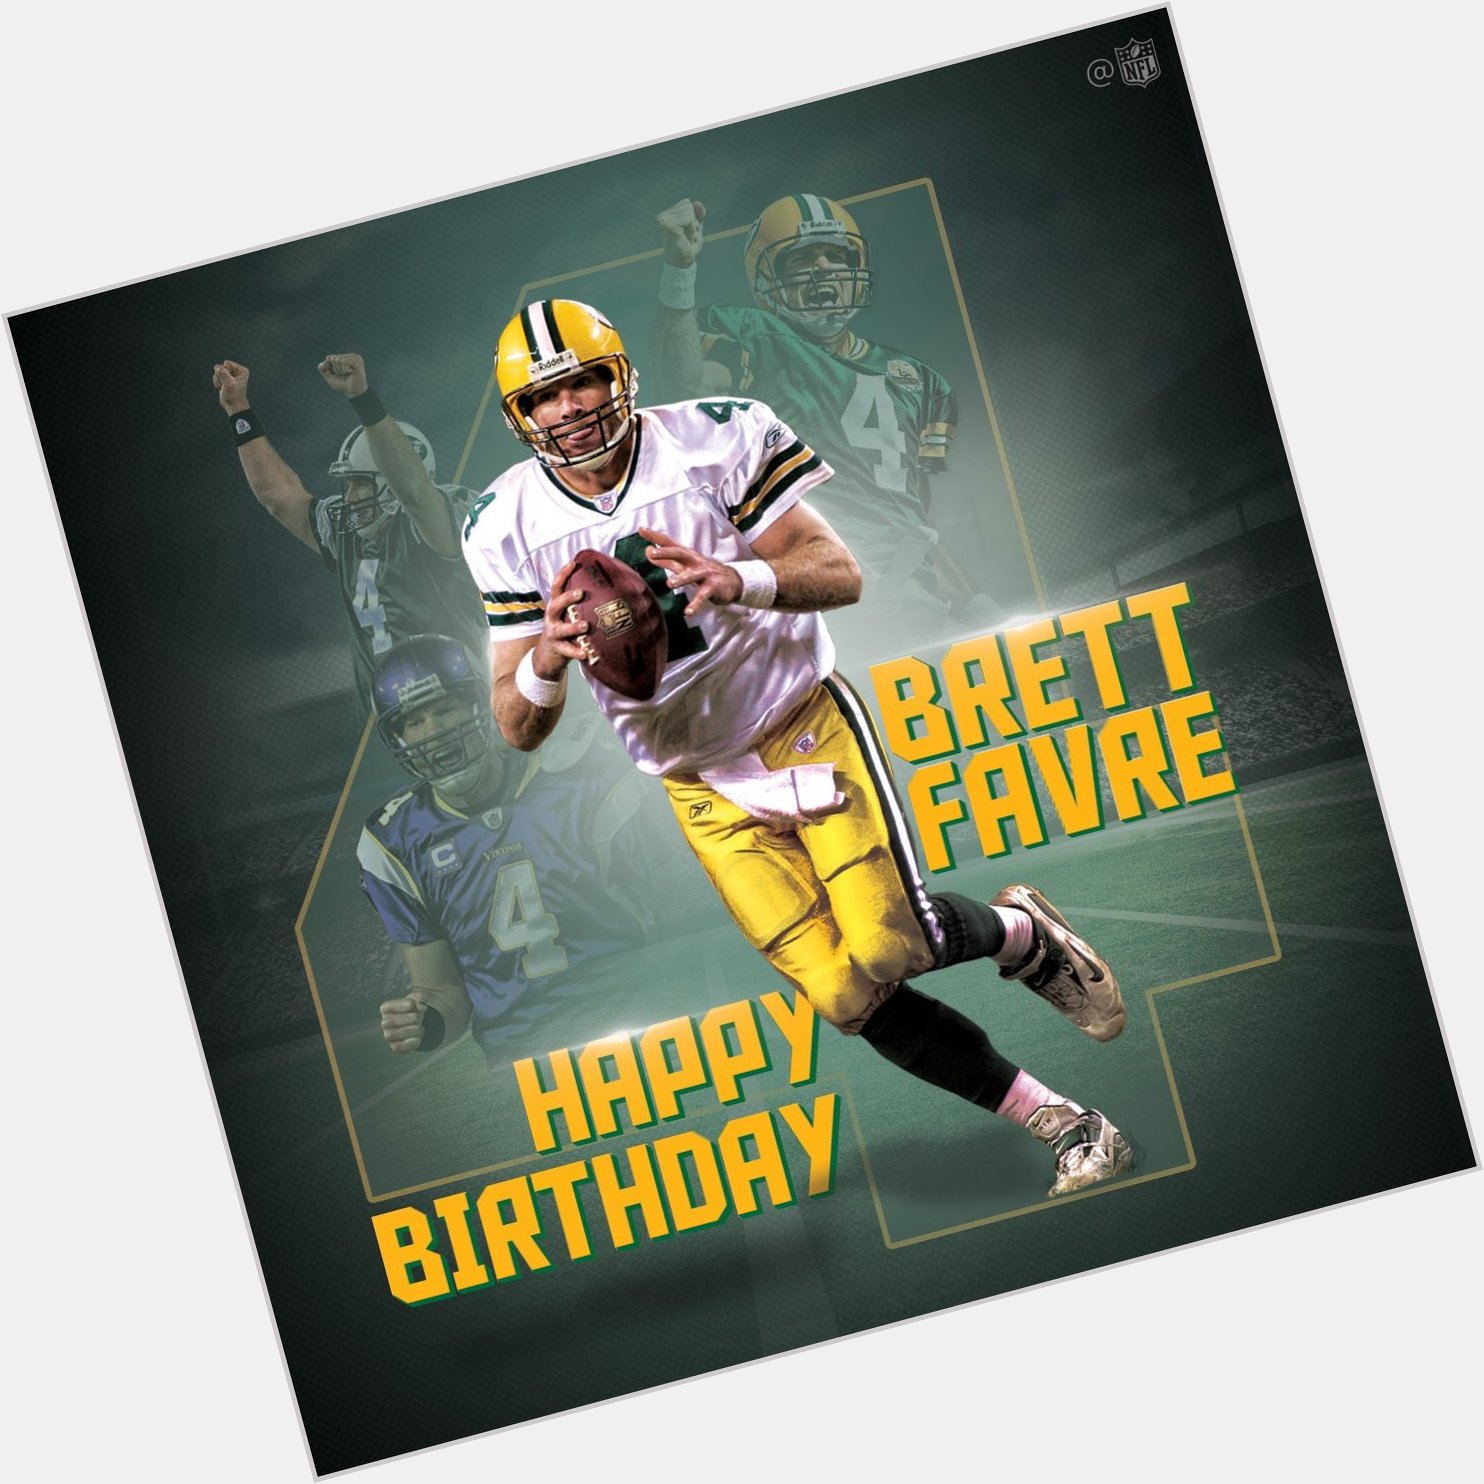 Happy birthday to my favorite player of all time and the GOAT Brett Favre 